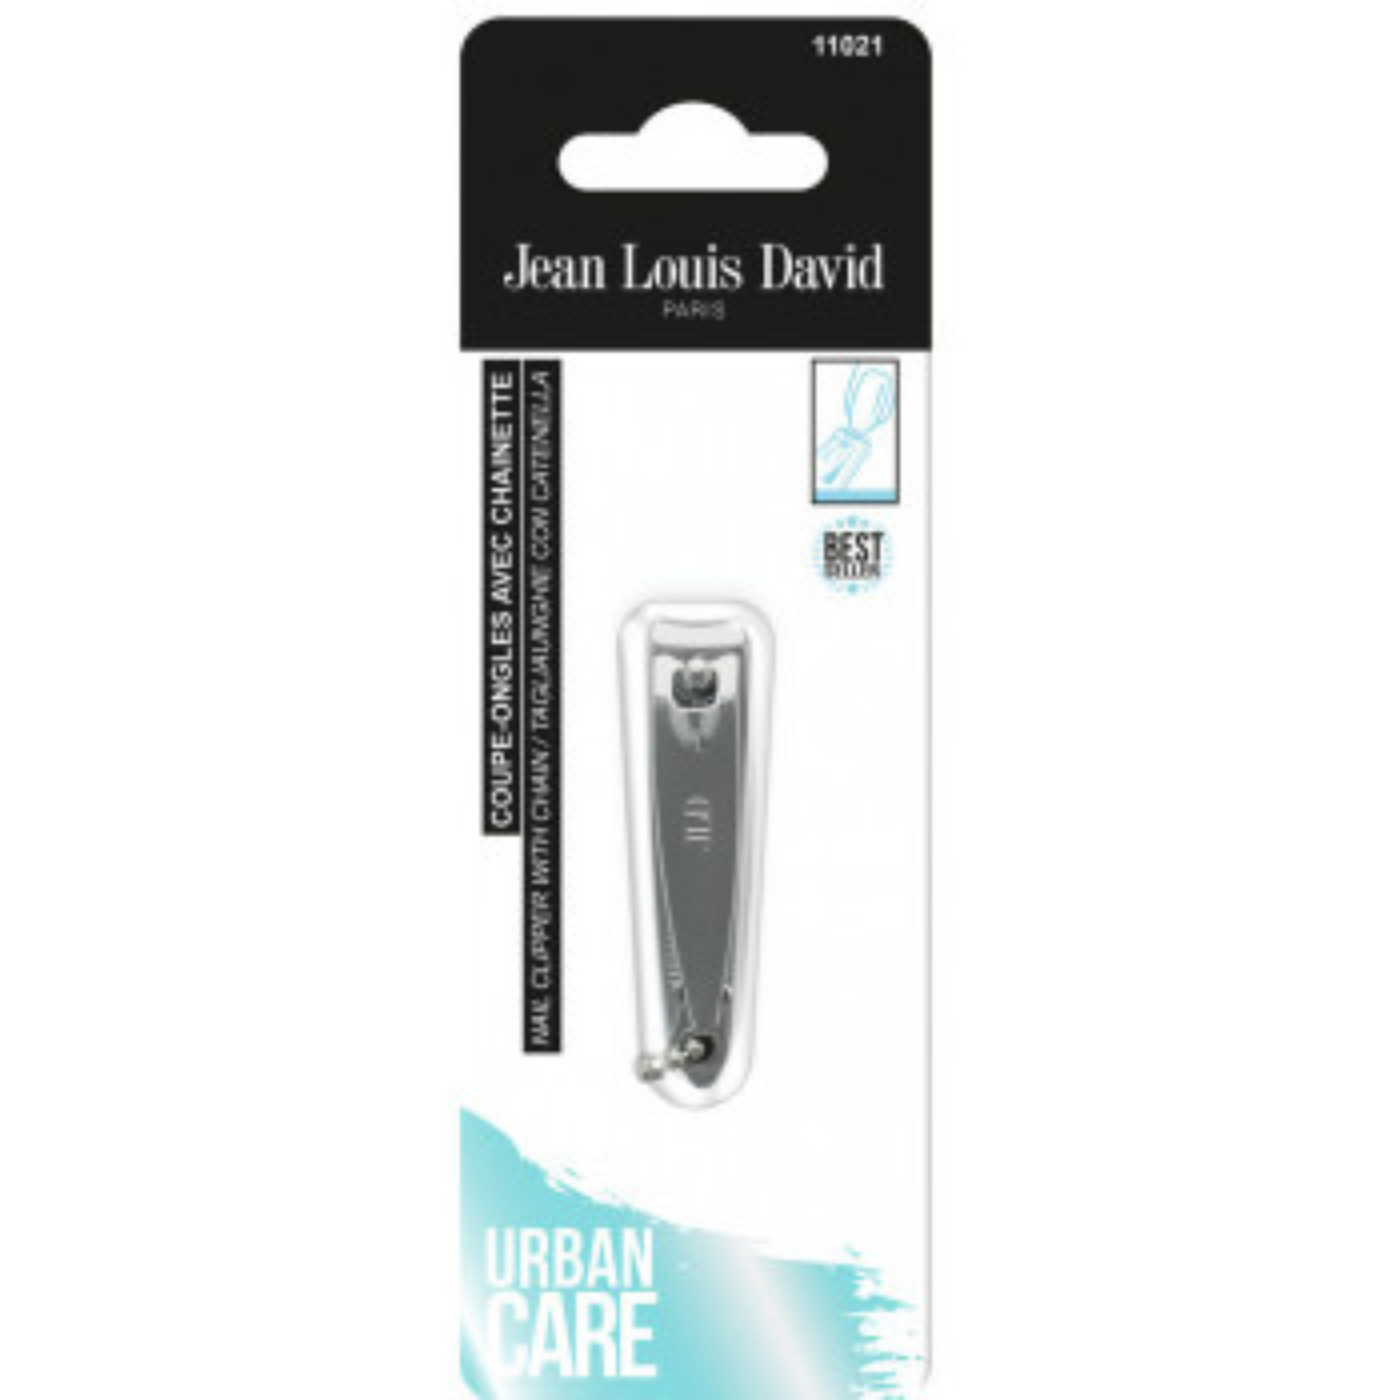 COUPE ONGLES PM CHAINETTE JEAN LOUIS DAVID - 11021